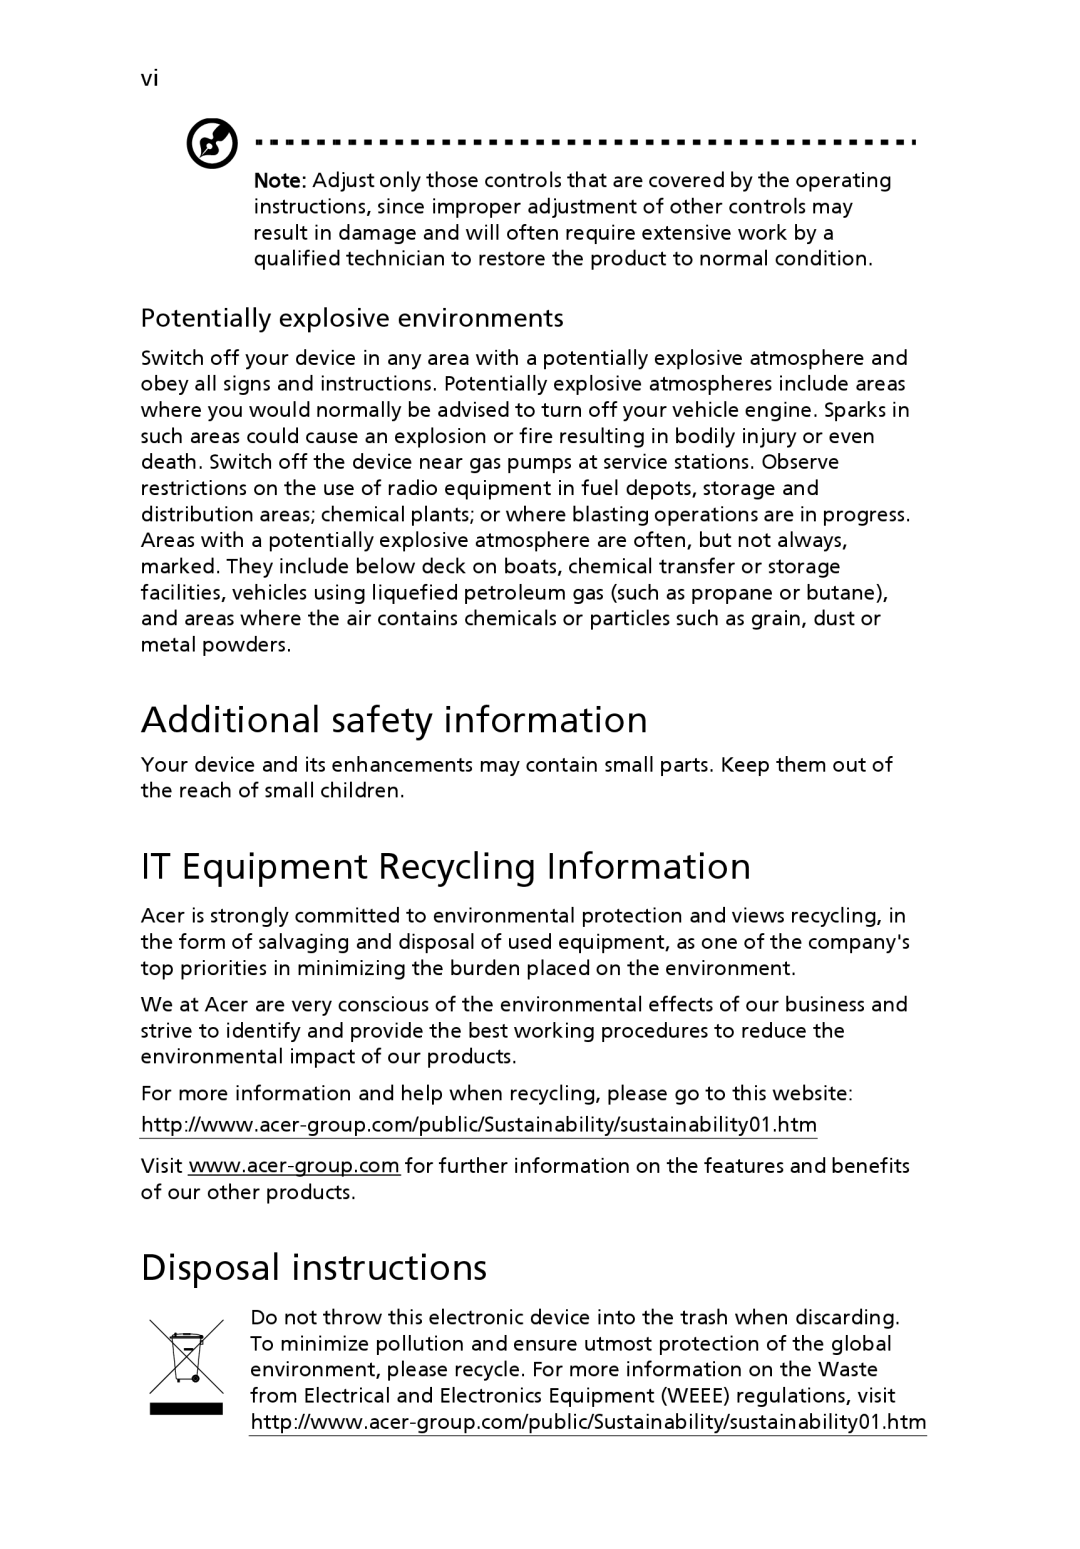 Acer S243HL manual Additional safety information, IT Equipment Recycling Information, Disposal instructions 